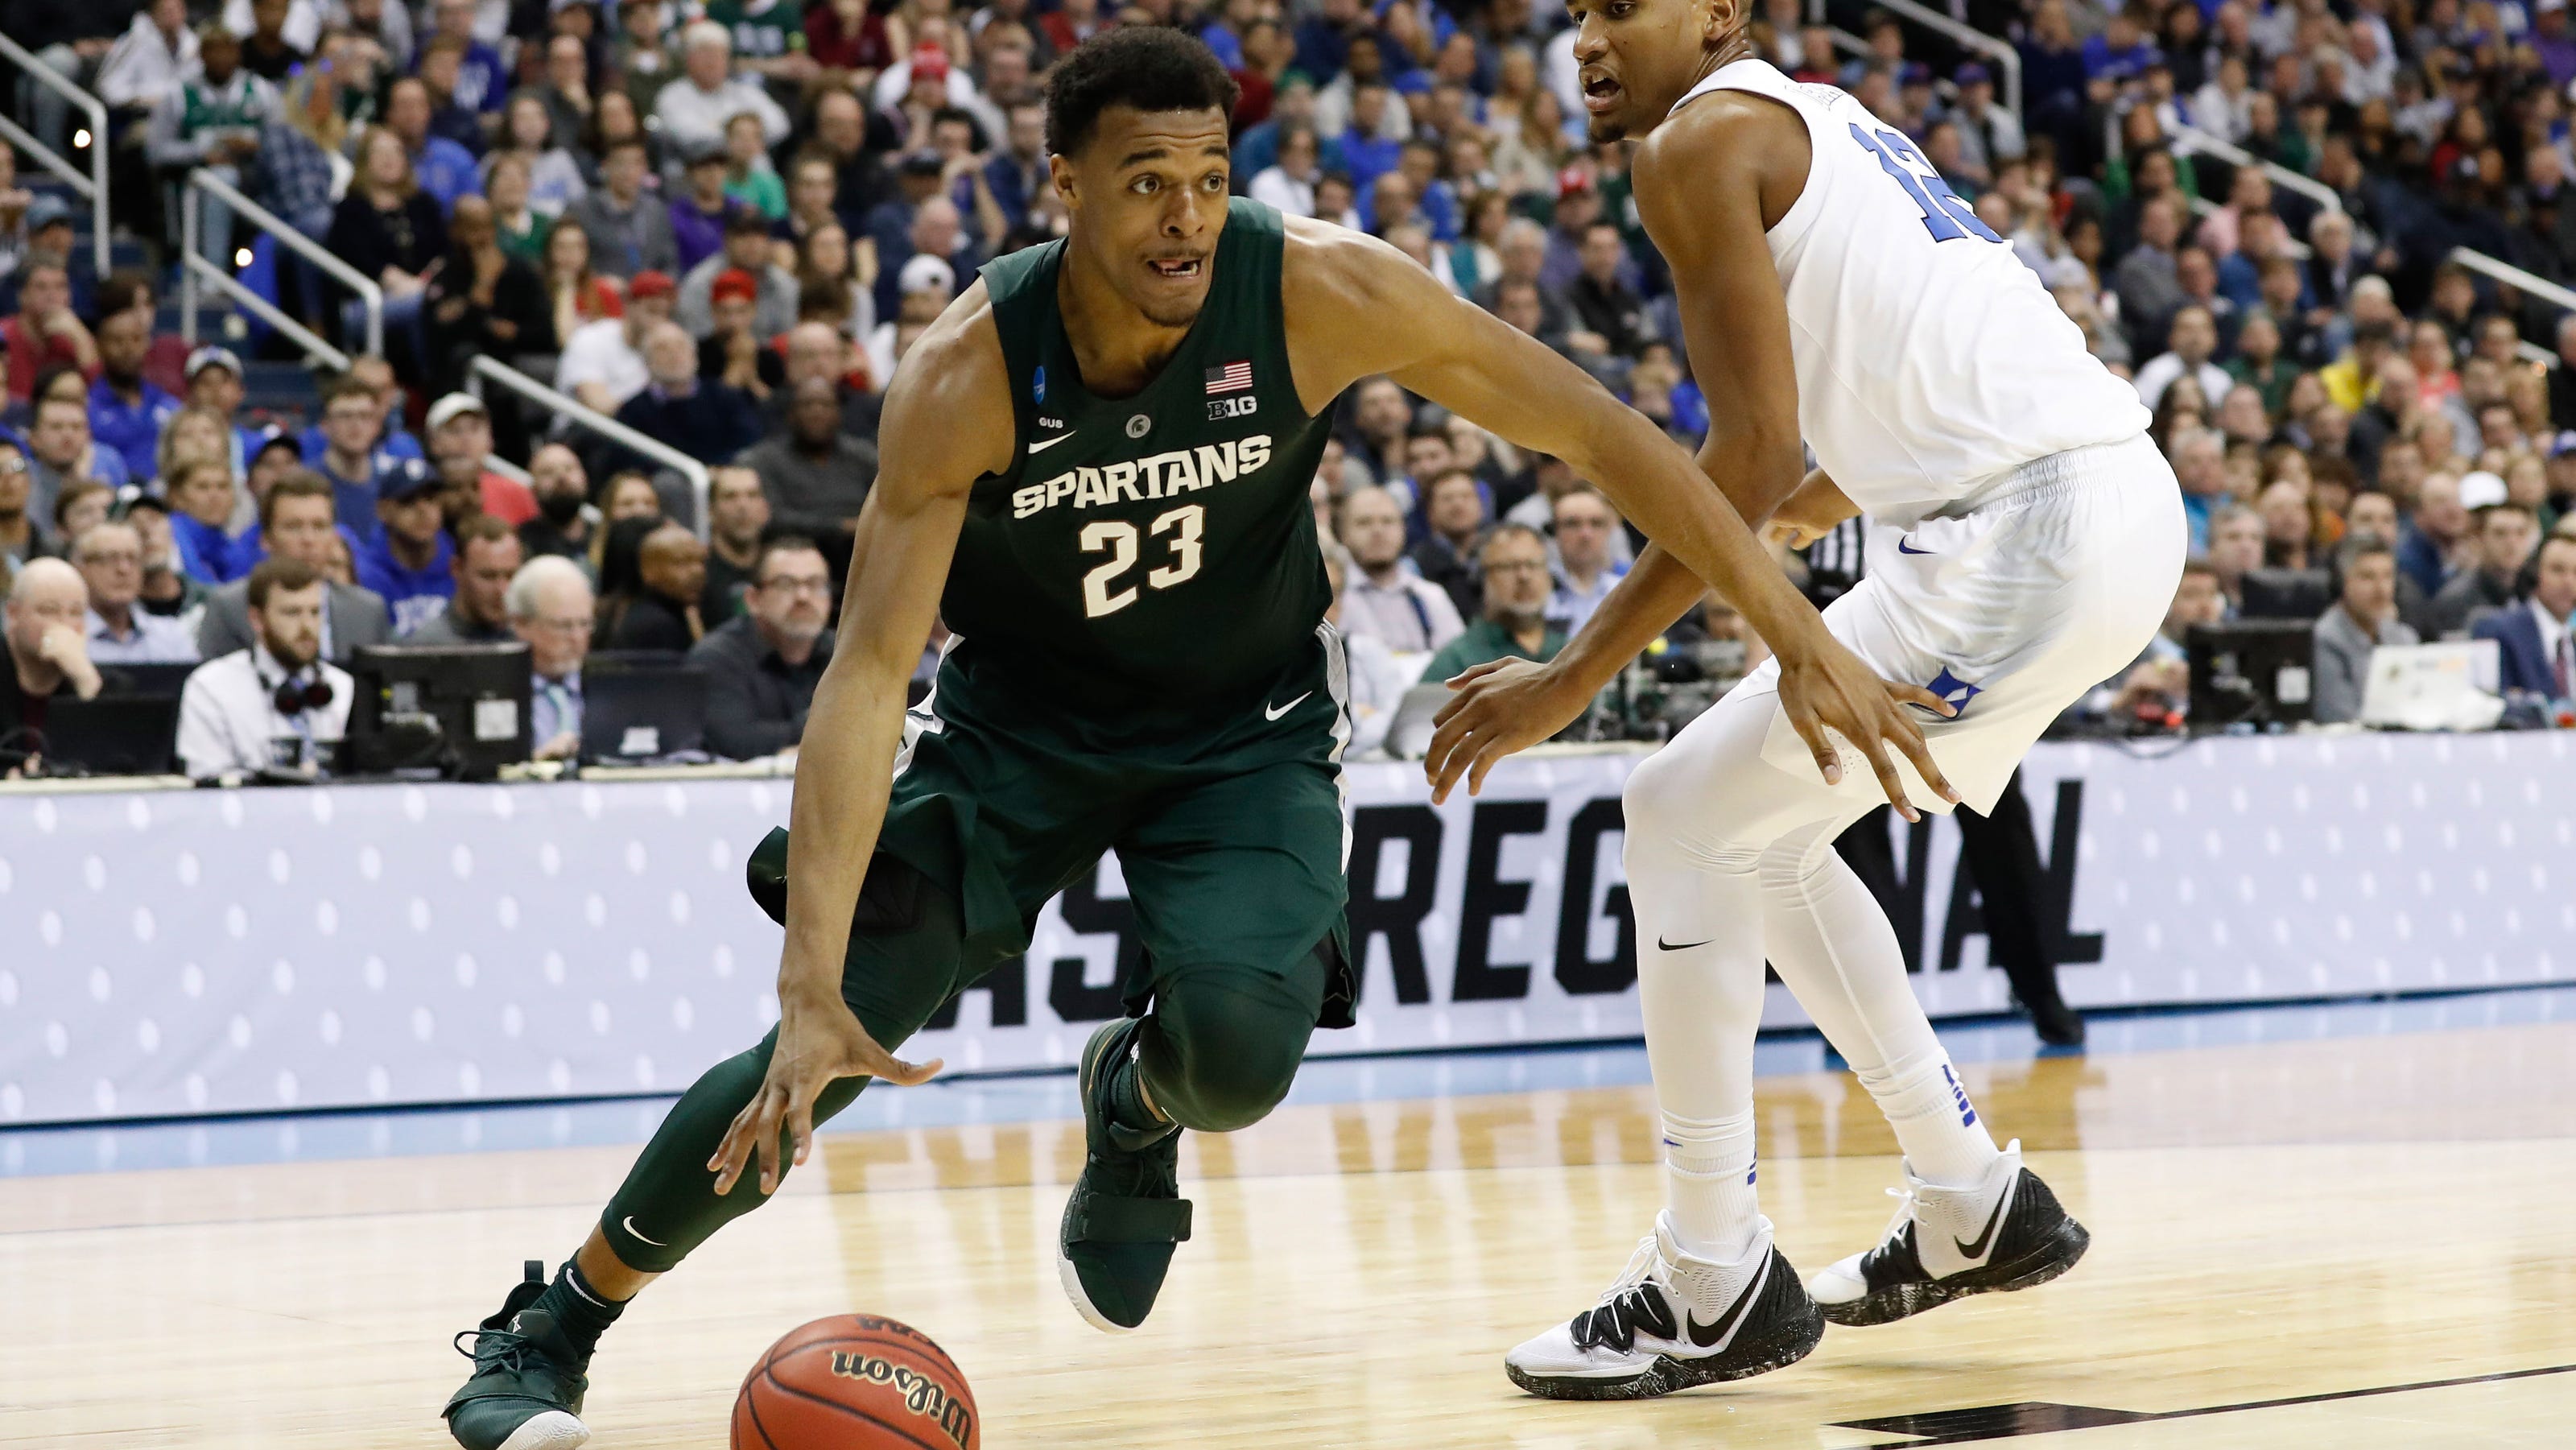 Michigan State basketball is preseason No. 1 for first time